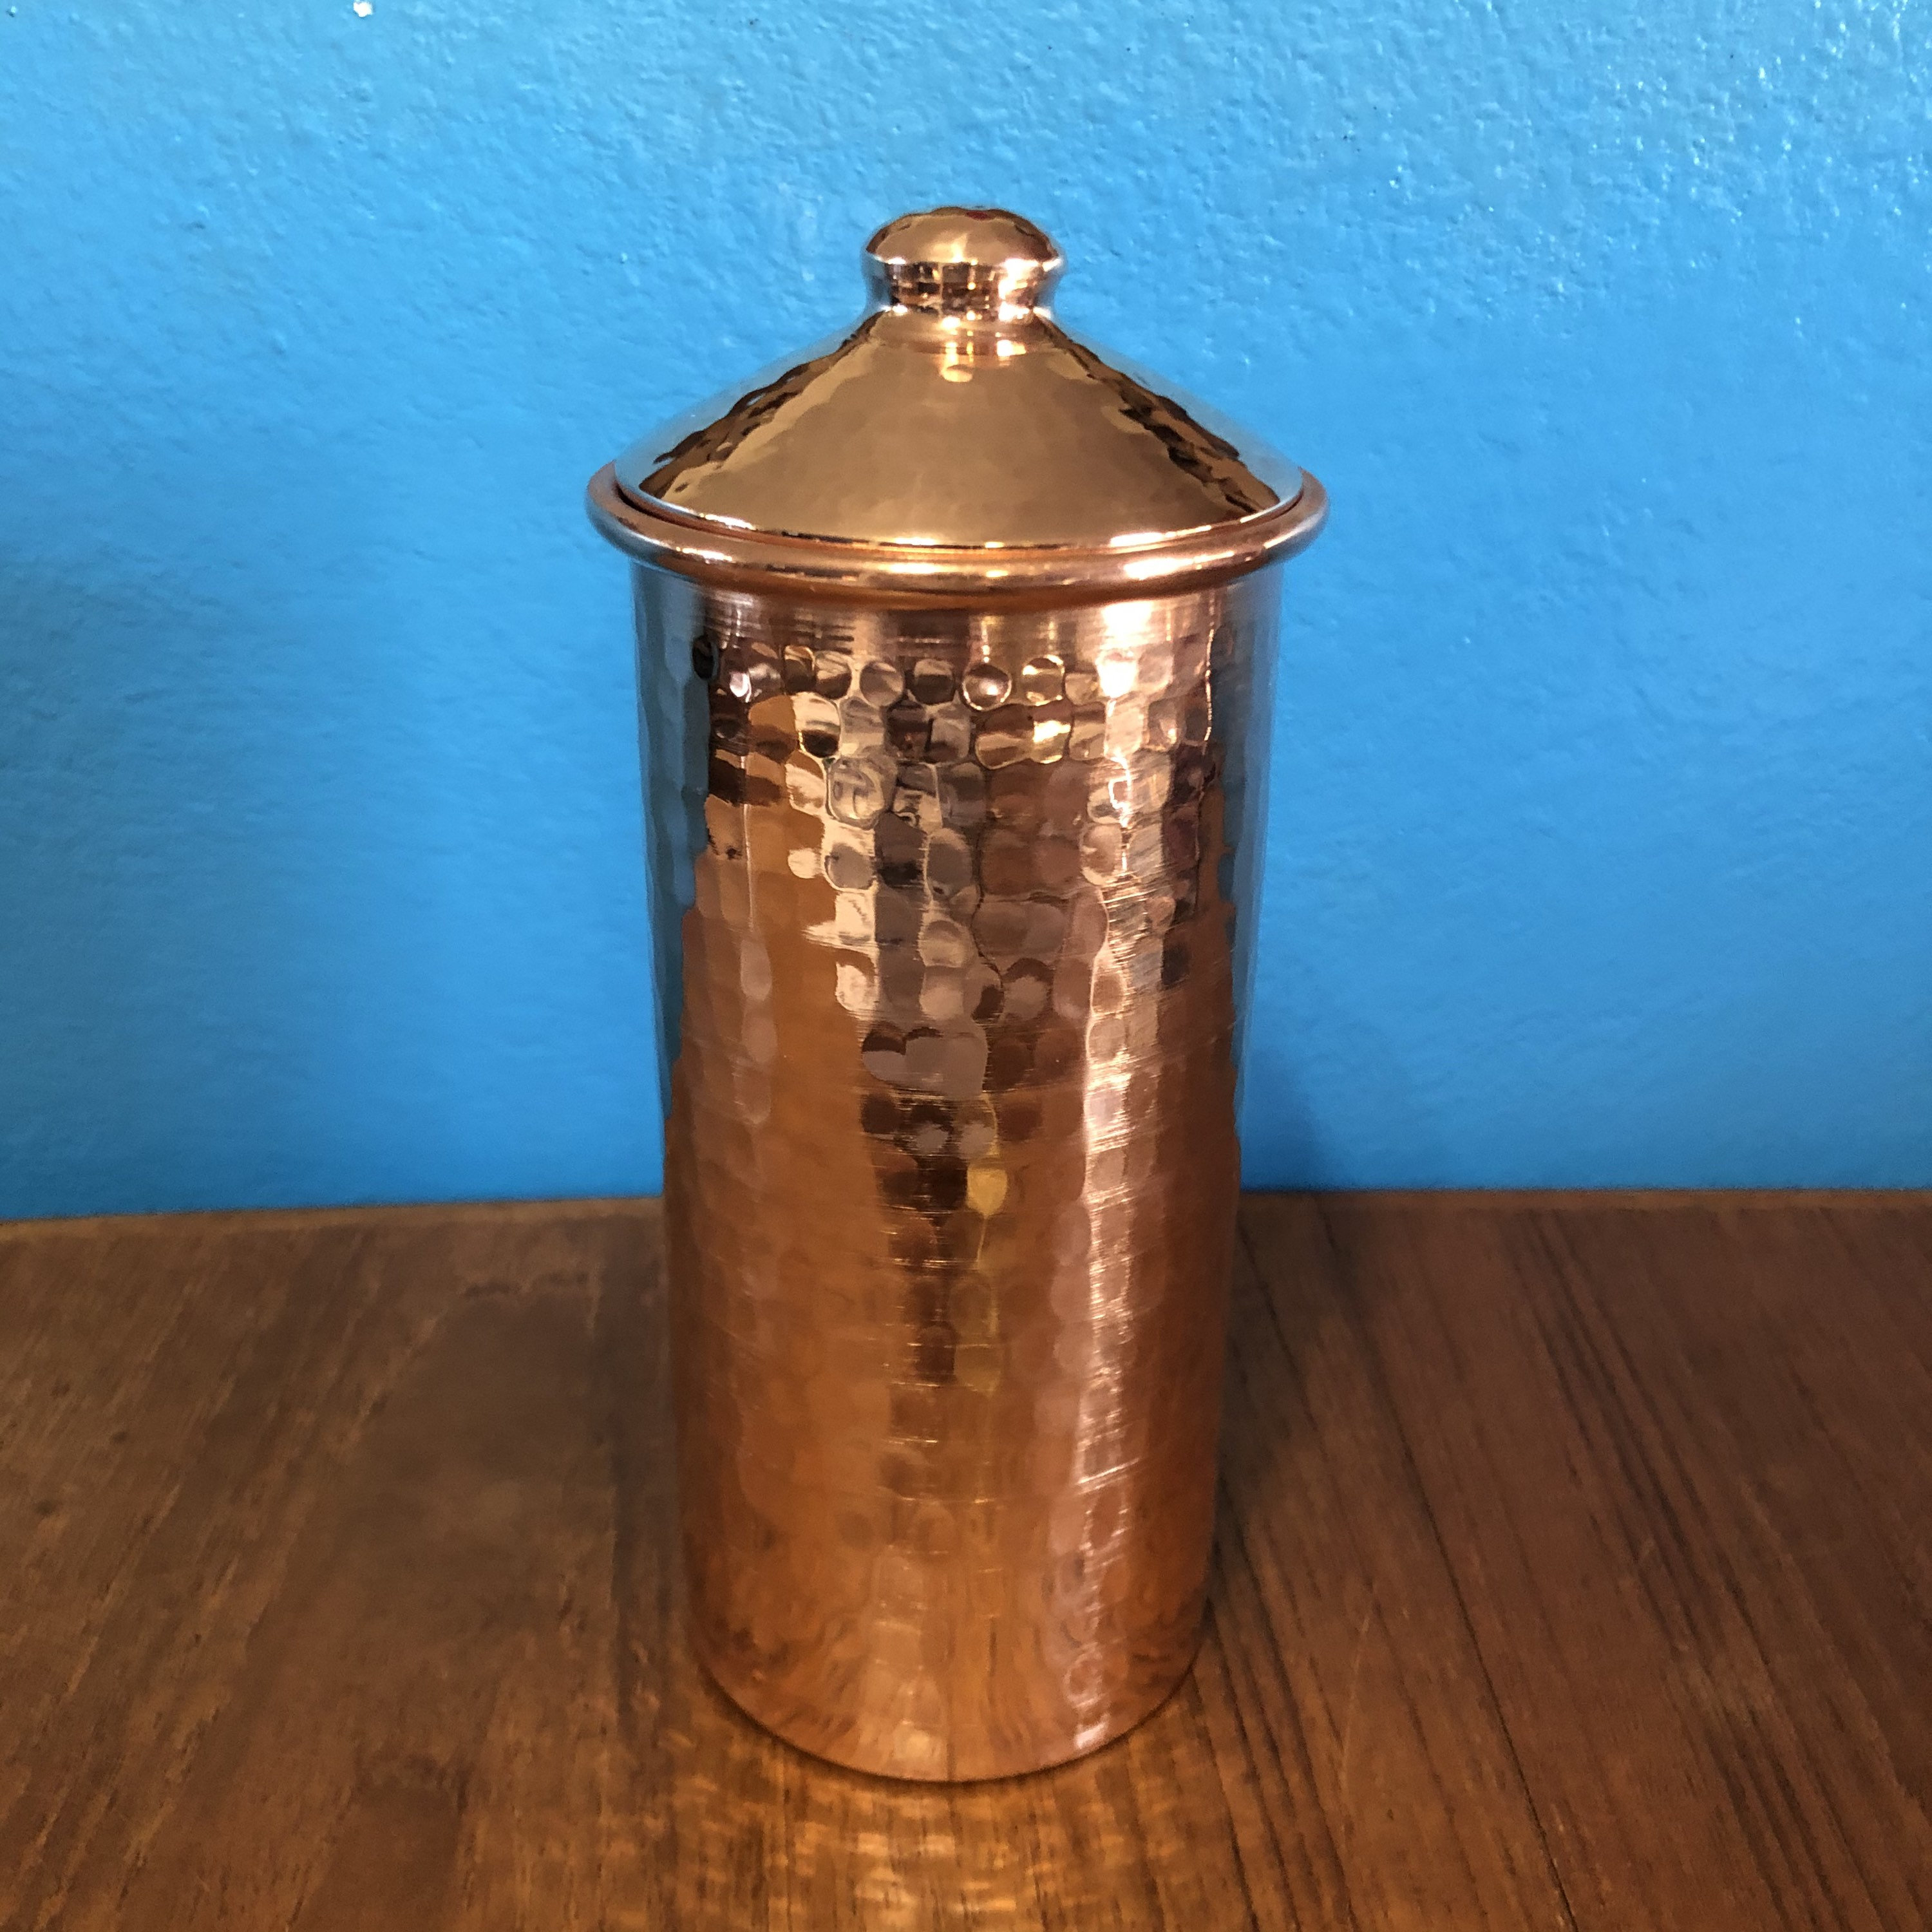 20 oz Copper Beer Tumbler Hammered     AC6009 Details about   DRINK TUMBLERS 